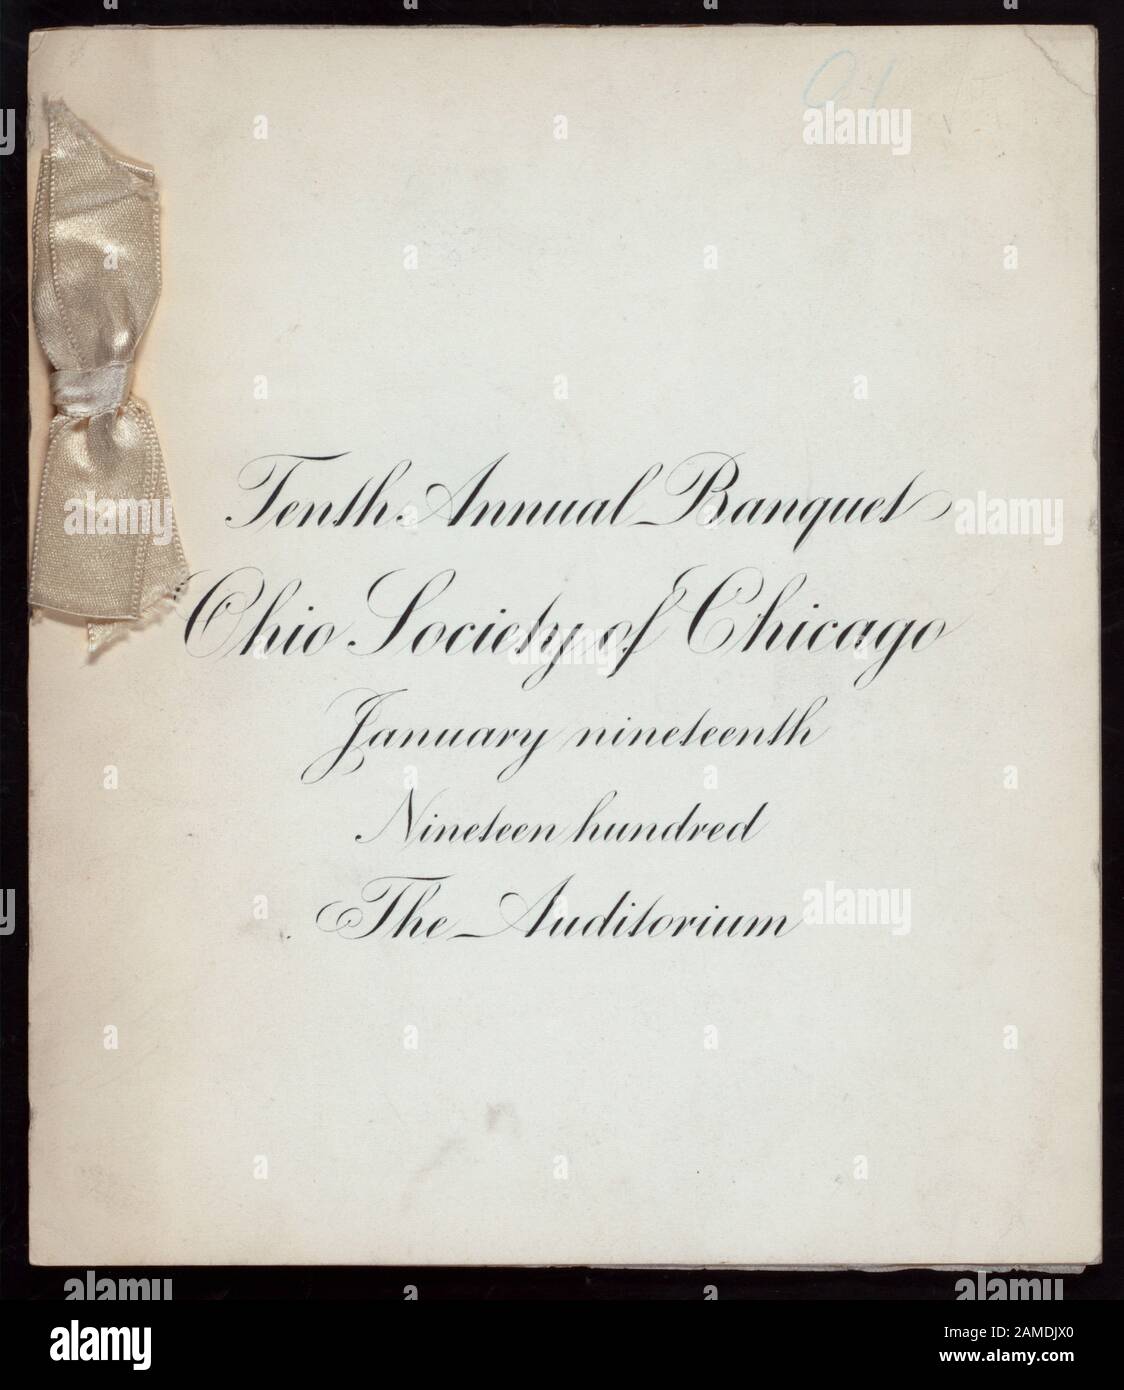 TENTH ANNUAL BANQUET (held by) OHIO SOCIETY OF CHICAGO; (at) AUDITORIUM, THE (REST;)  AFTER DINNER TOASTS LISTED; WHITE SATIN RIBBON; TENTH ANNUAL BANQUET [held by] OHIO SOCIETY OF CHICAGO; [at] AUDITORIUM, THE (REST;) Stock Photo